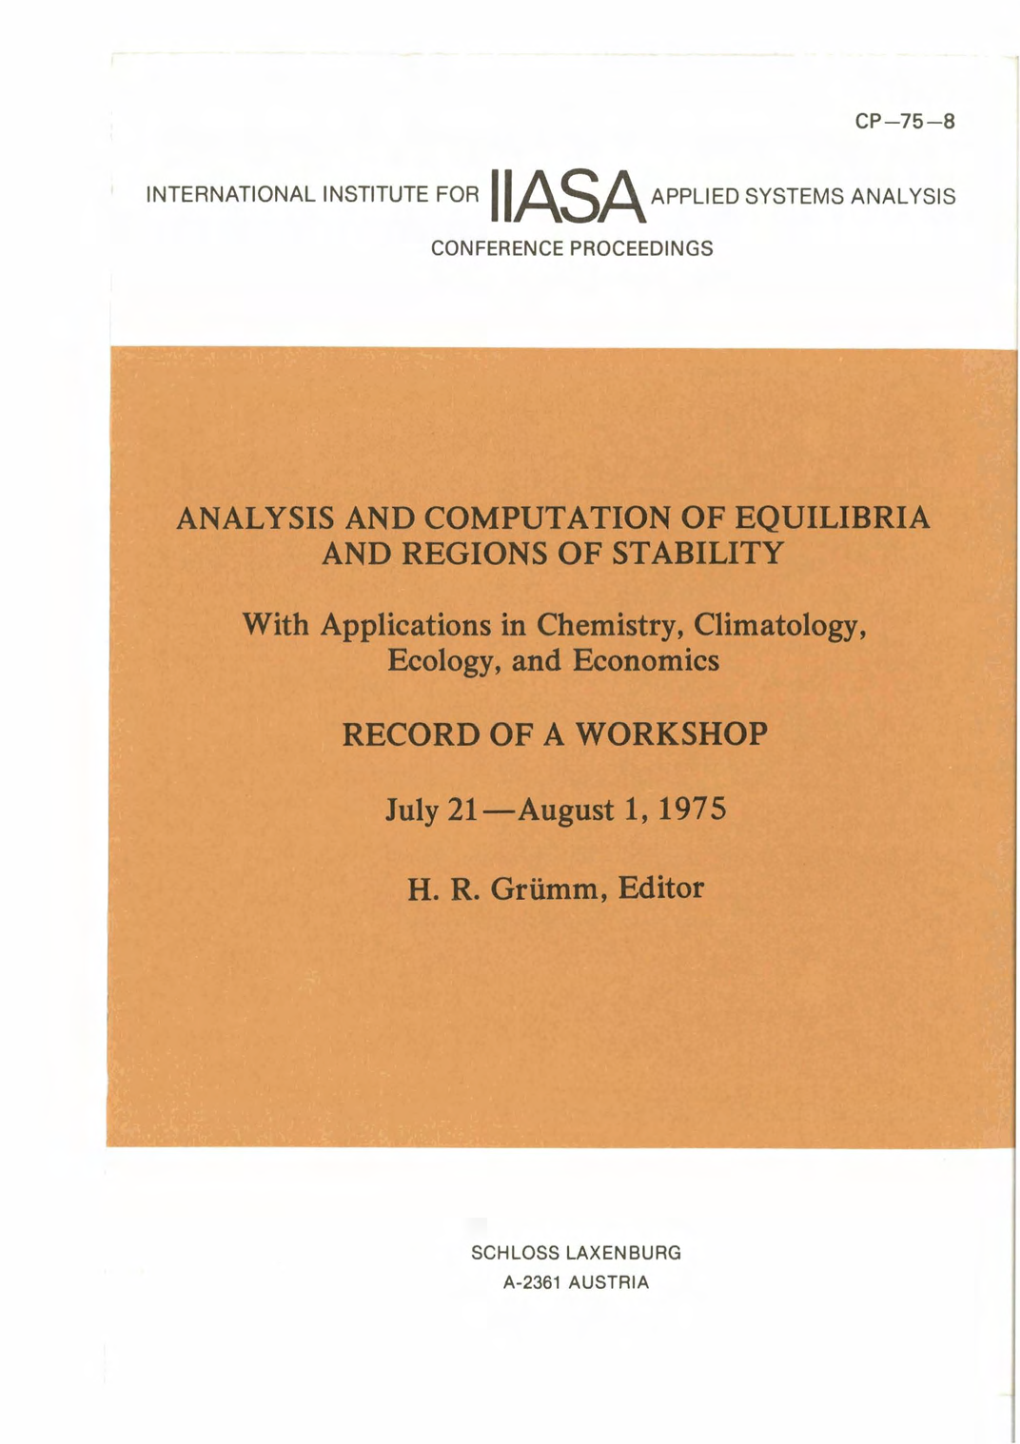 Analysis and Computation of Equilibria and Regions of Stability